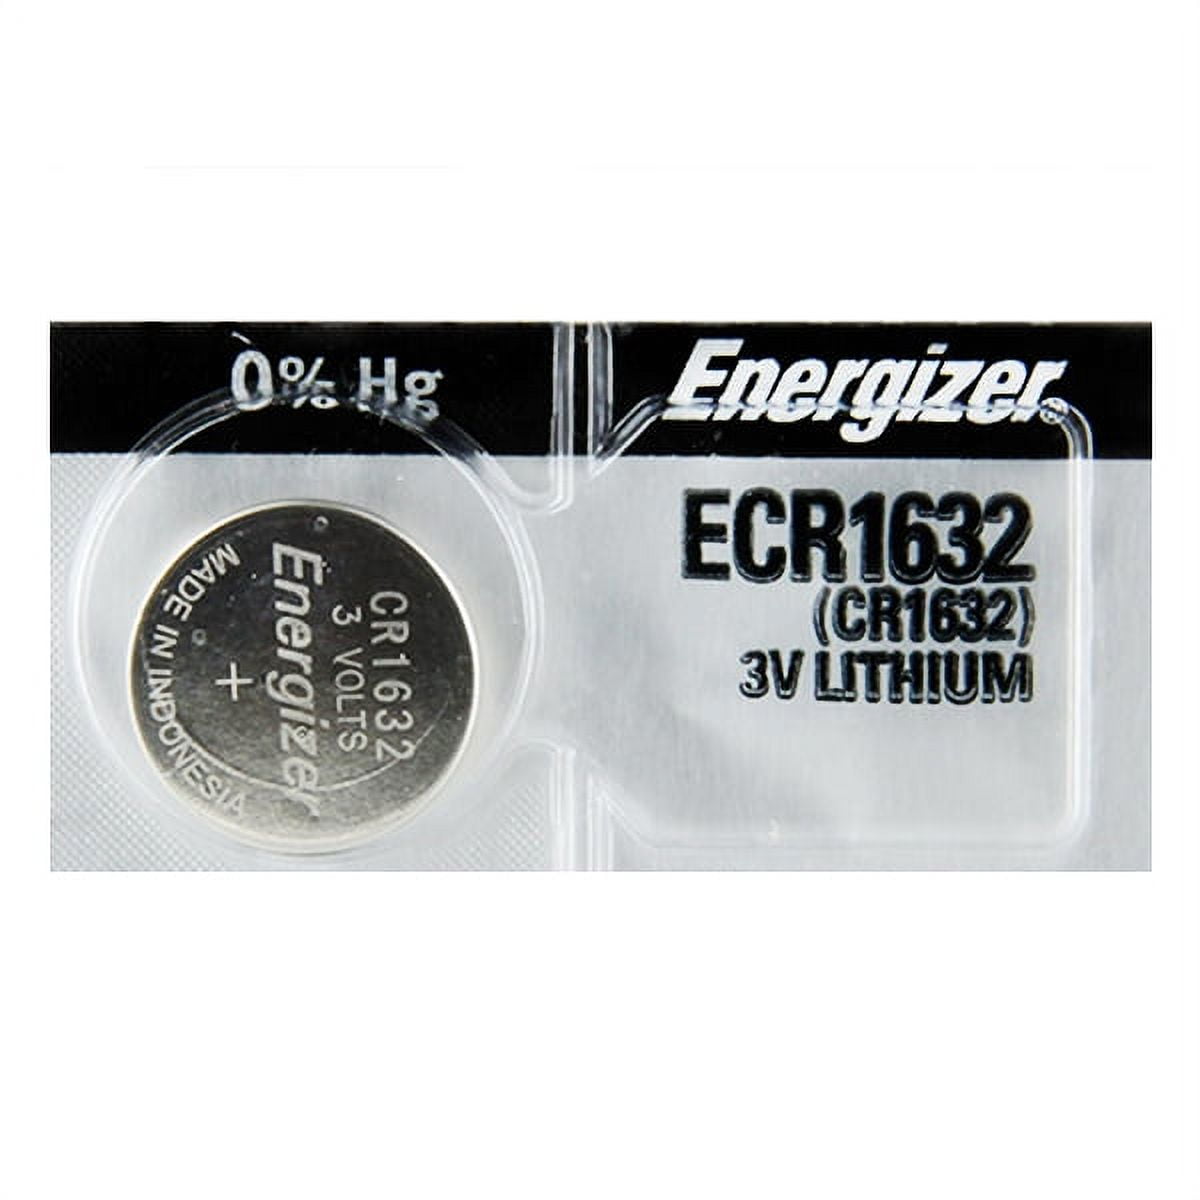 Energizer Cr1632 3V Lithium Coin Battery - 10 Pack + 30% Off!